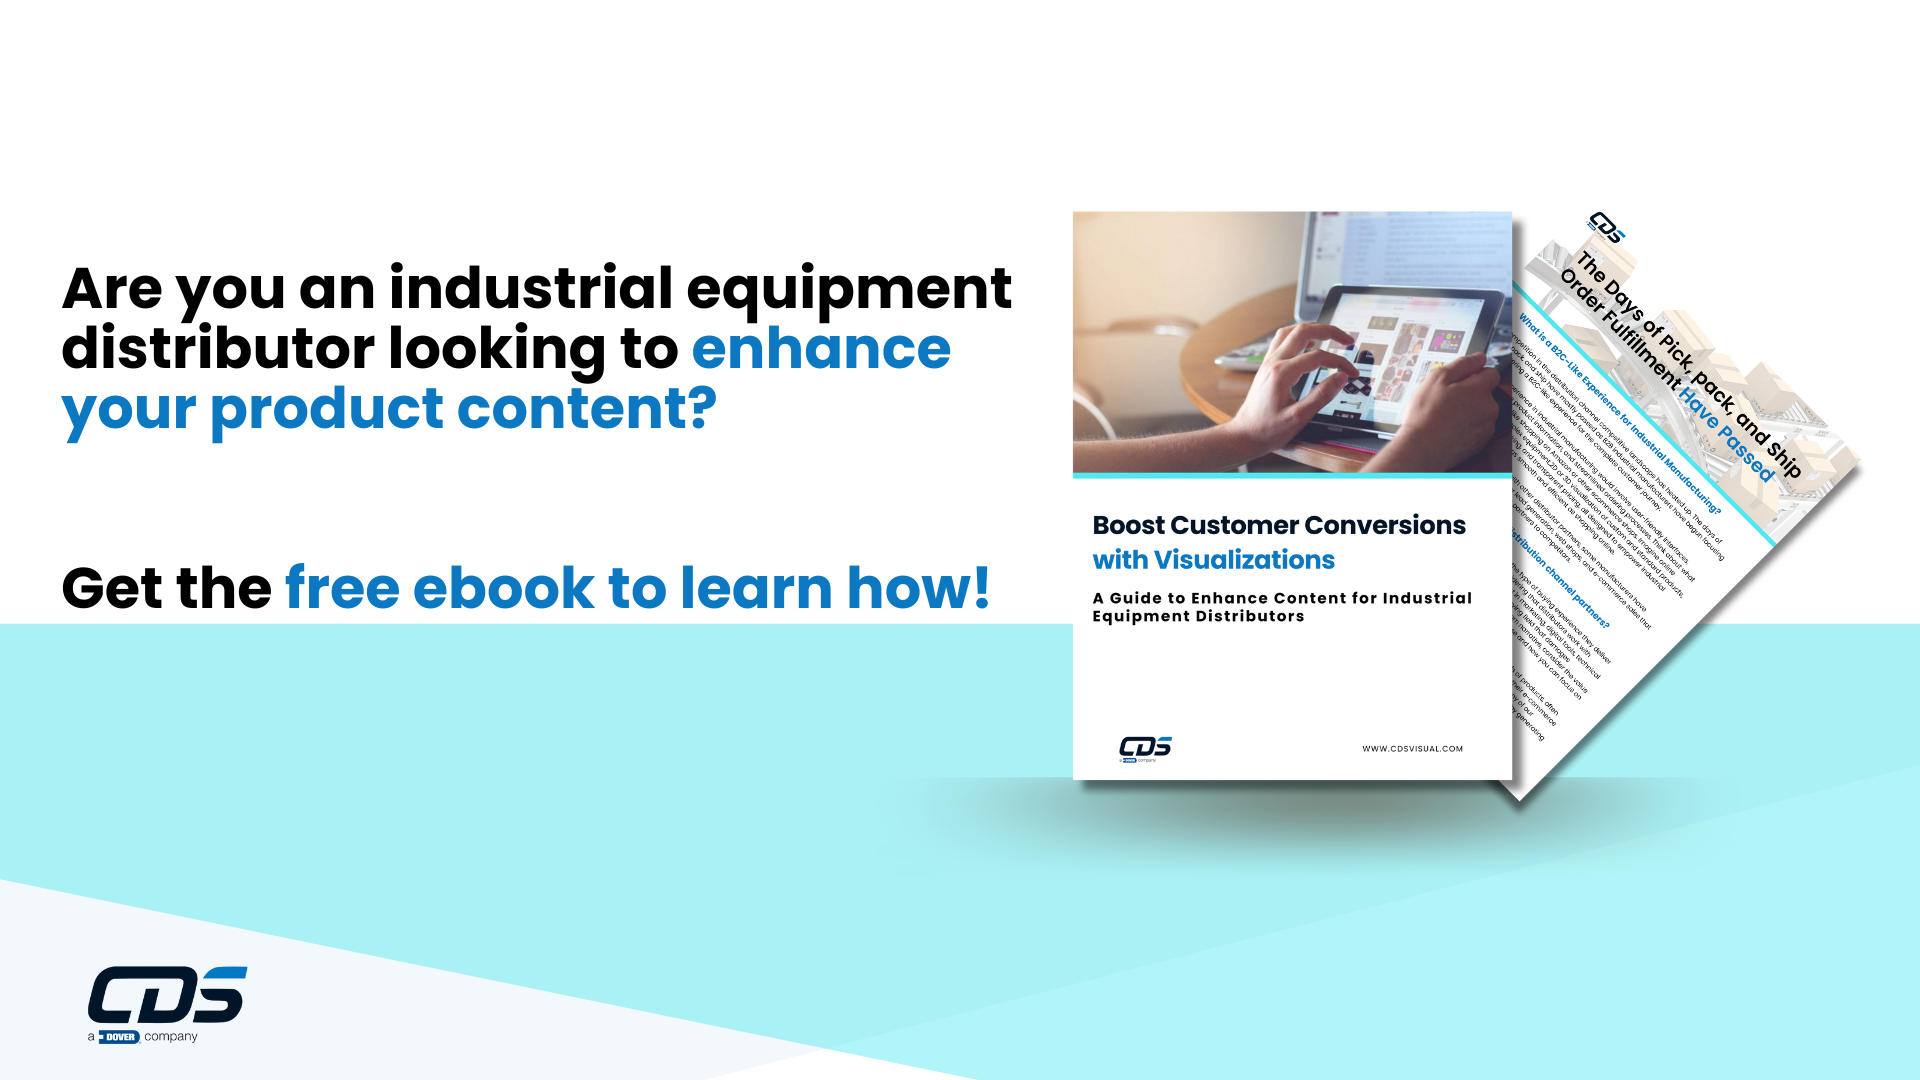 A Guide to Enhance Content for MRO Equipment Distributors